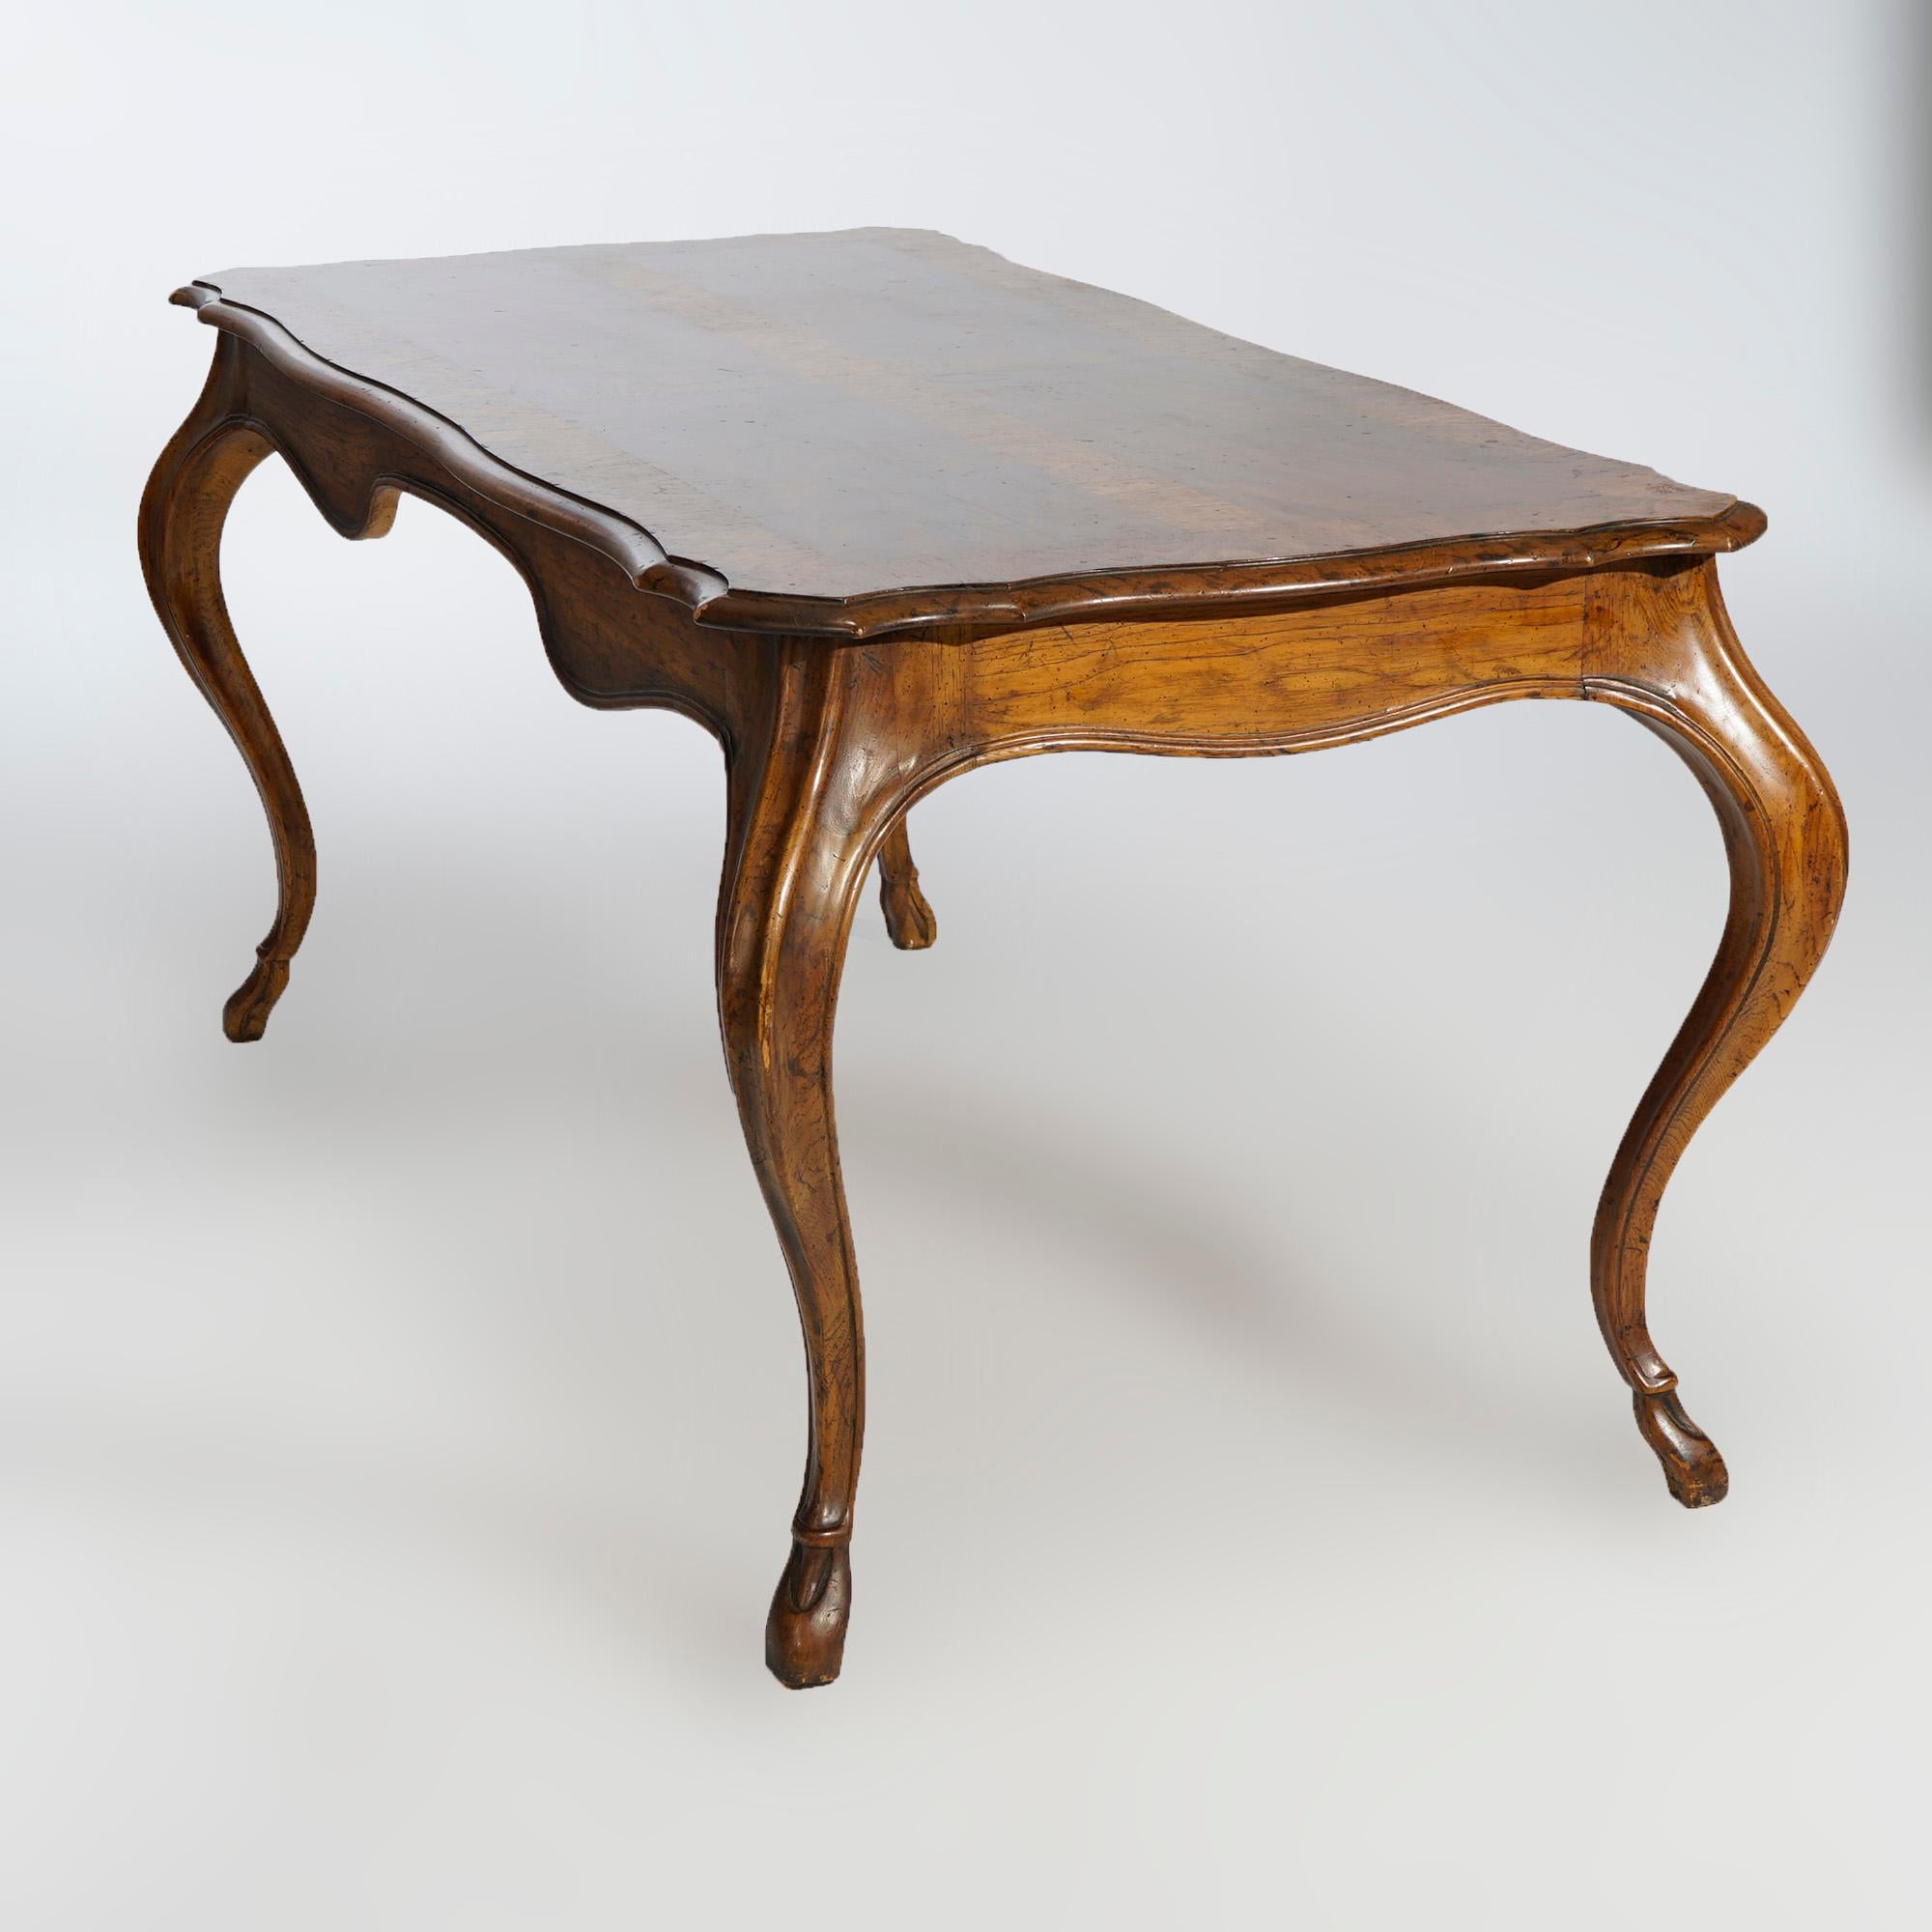 A French Provincial style writing desk by Heritage of the Grand Tour line offers walnut construction with shaped and beveled top having parquetry inlay over skirt with drawers, raised on cabriole legs terminating in stylized hoof feet, maker mark as